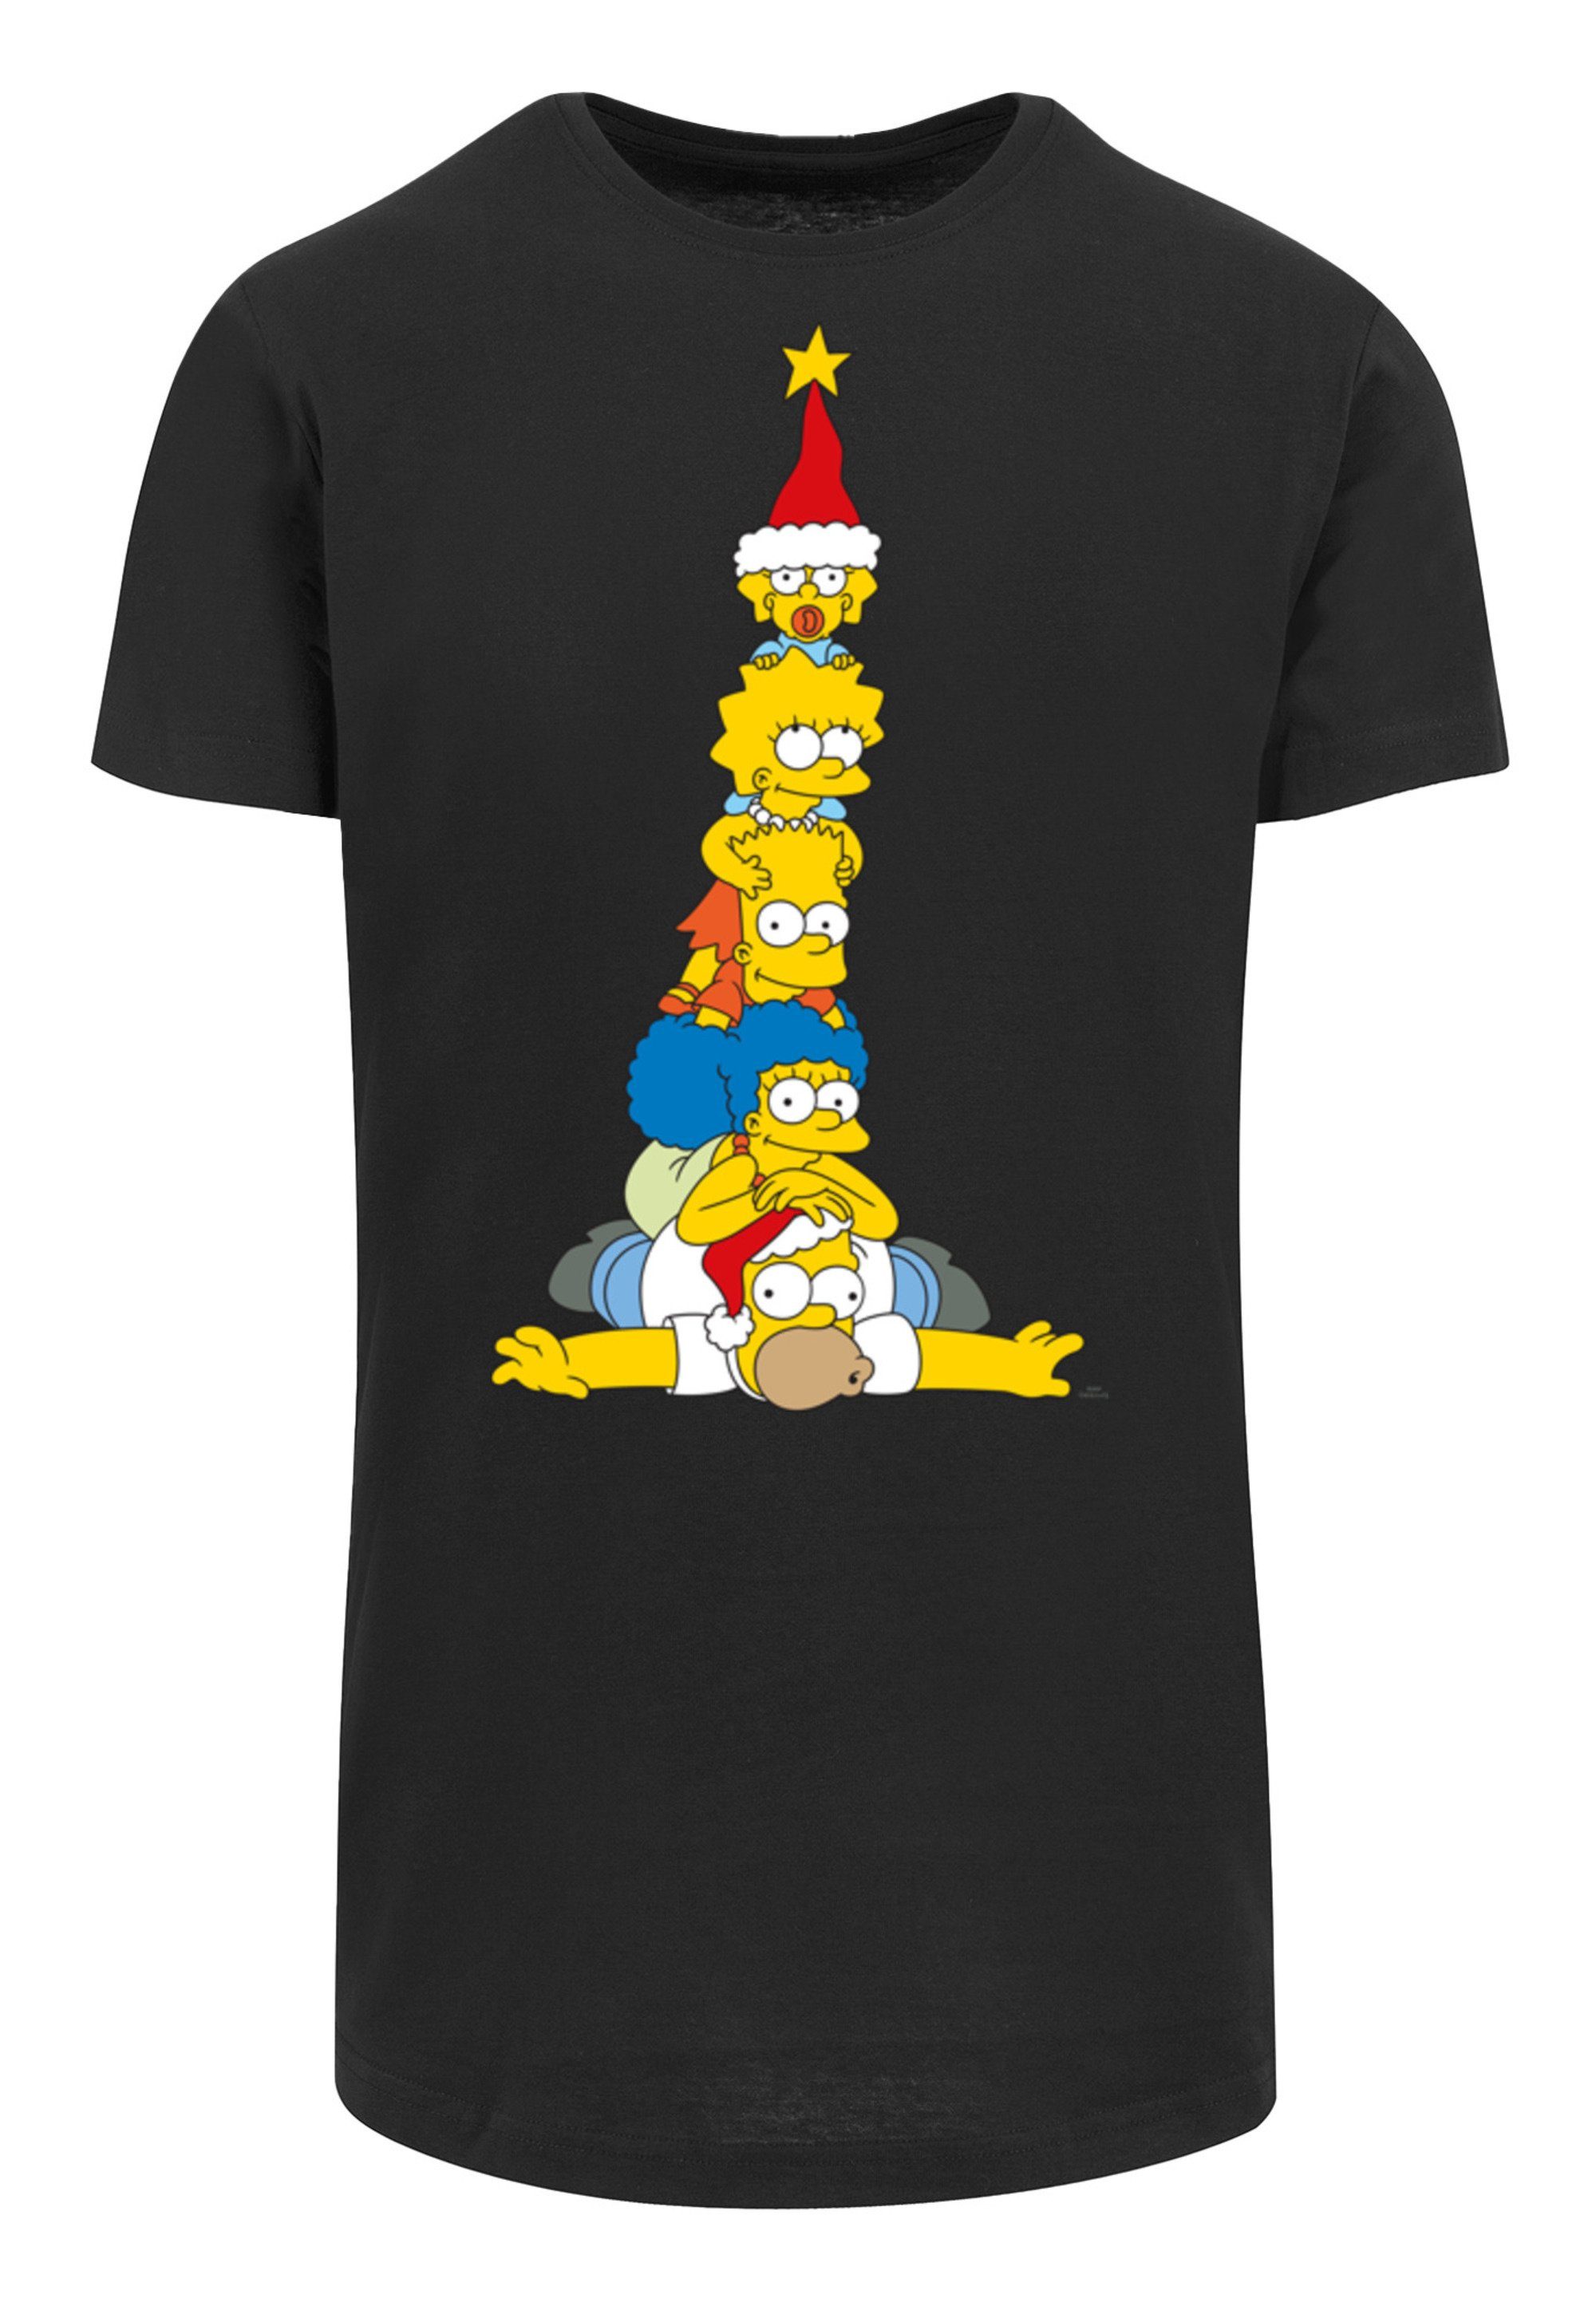 T-Shirt Simpsons Print, Weihnachtsbaum T-Shirt lizenziertes Simpsons The The Family F4NT4STIC Offiziell Christmas